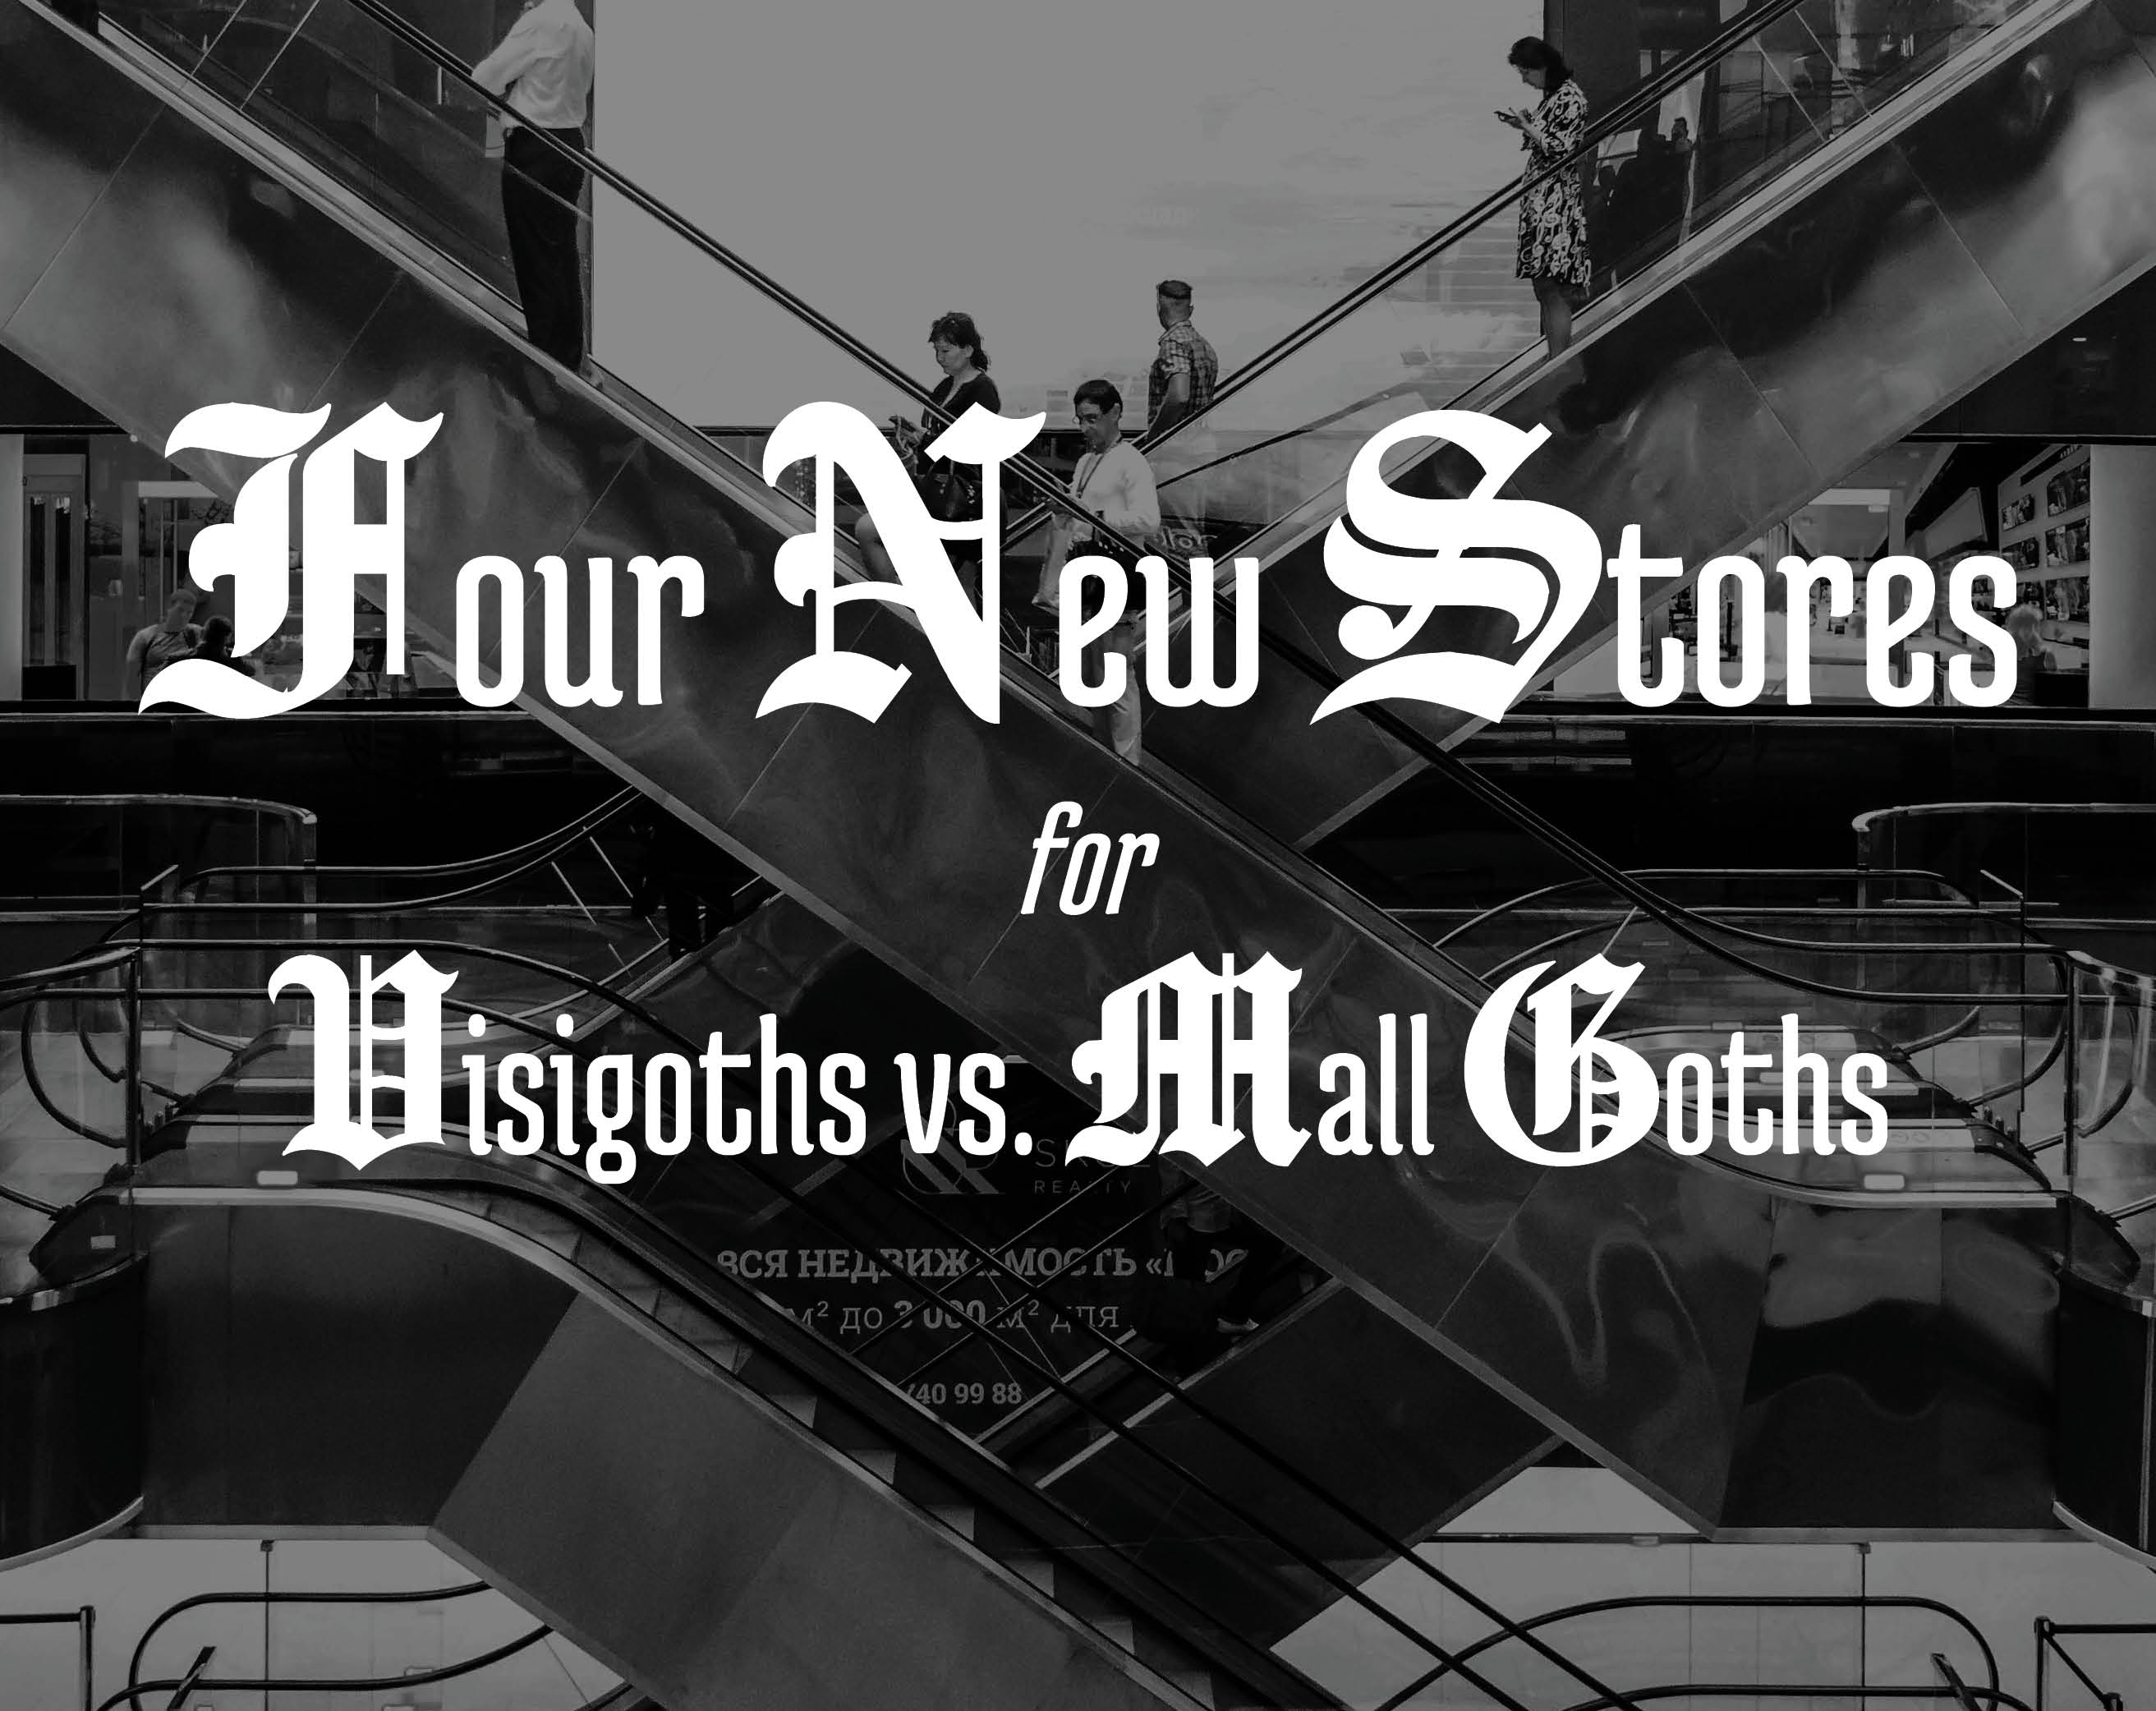 Four New Stores for Visigoths Vs. Mall Goths